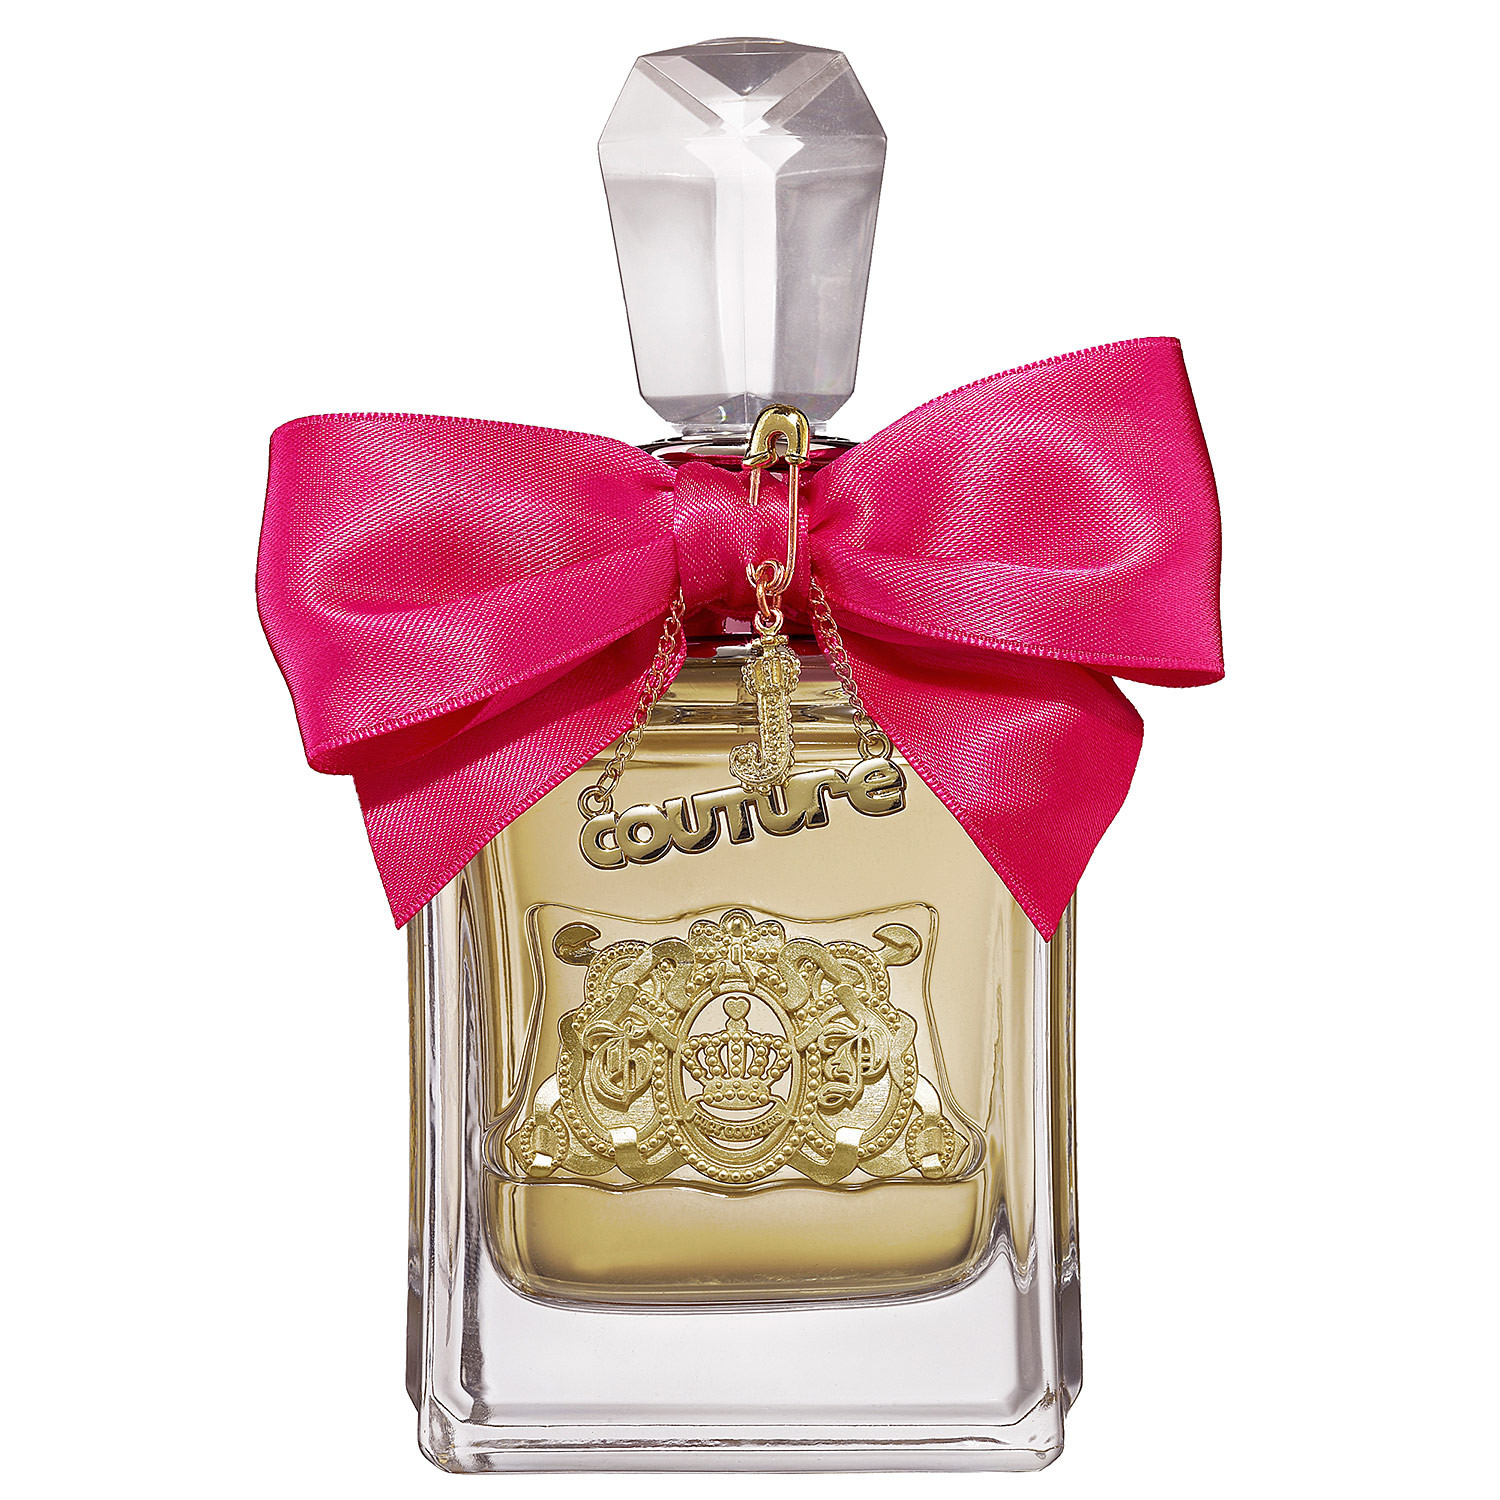 Viva La Juicy Perfume | 25 Gifts For the Most Basic B*tch in Your Life